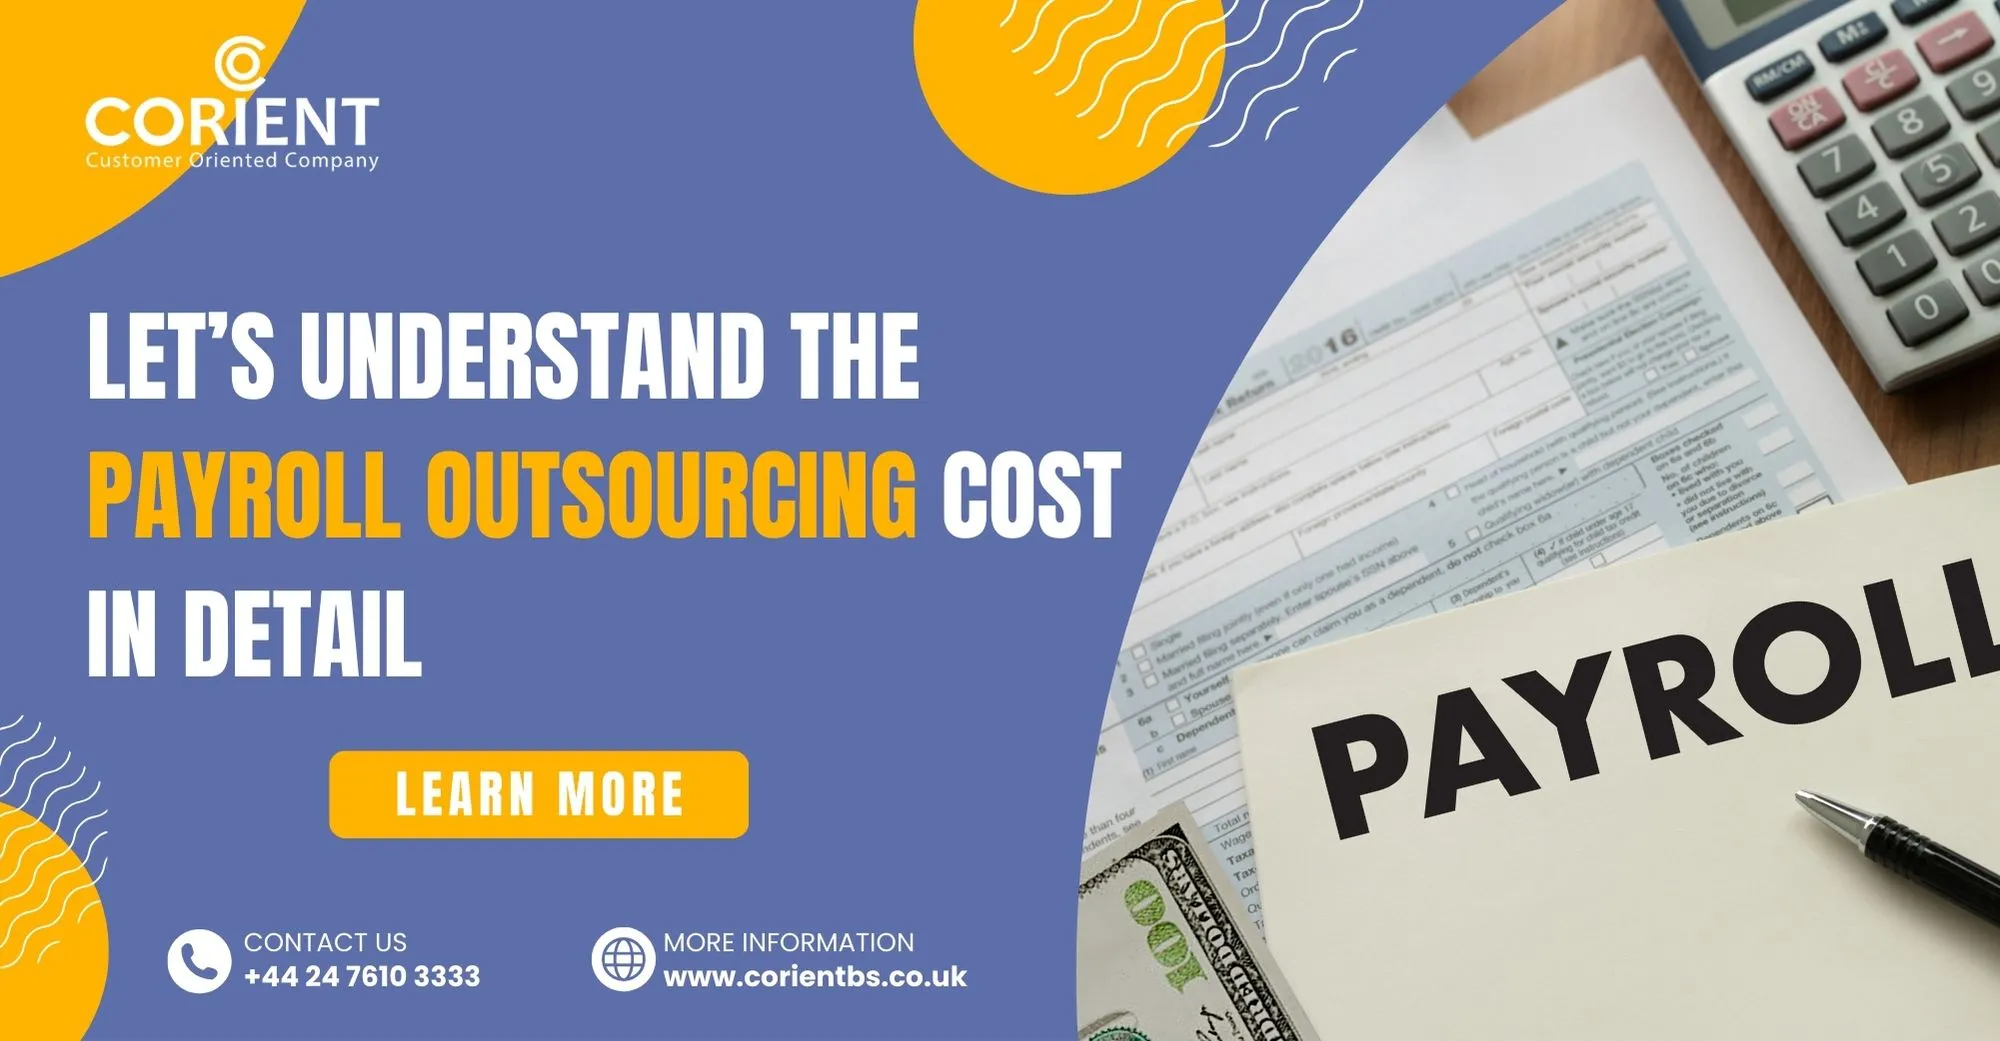 Let’s Understand the Payroll Outsourcing Cost in Detail